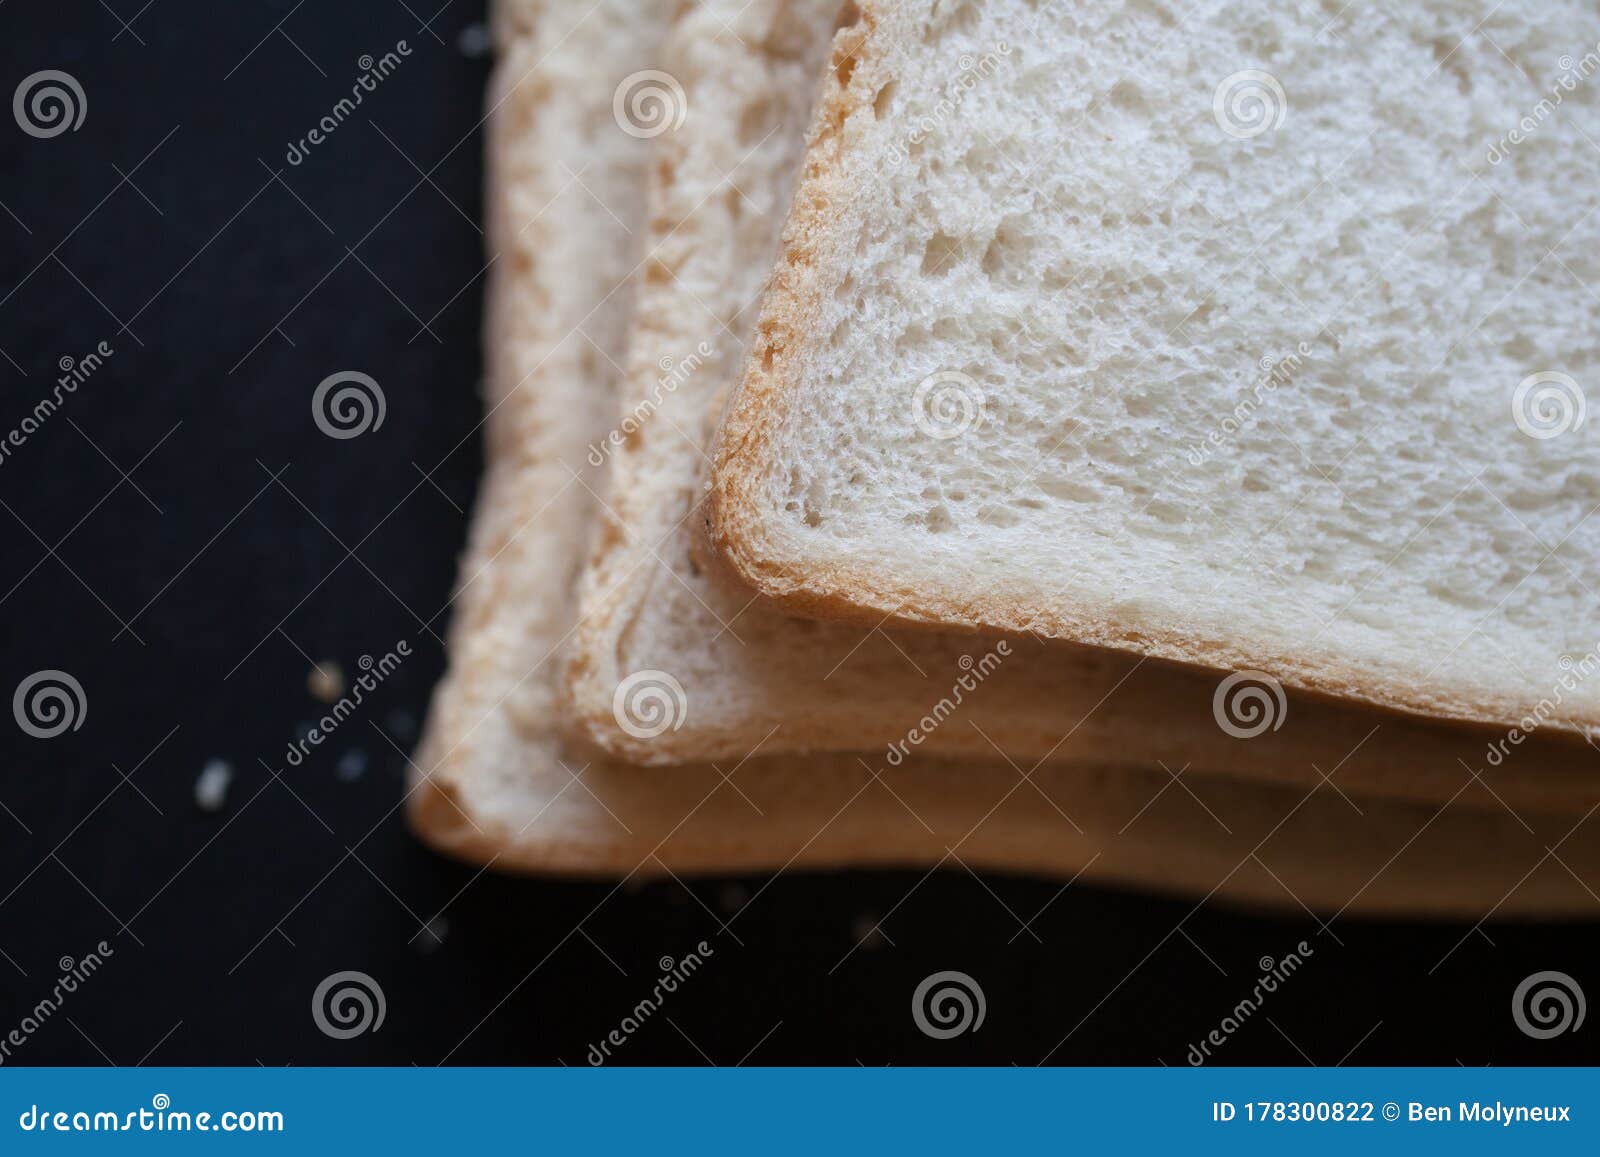 a close up of 3 slices of white bread against a black background